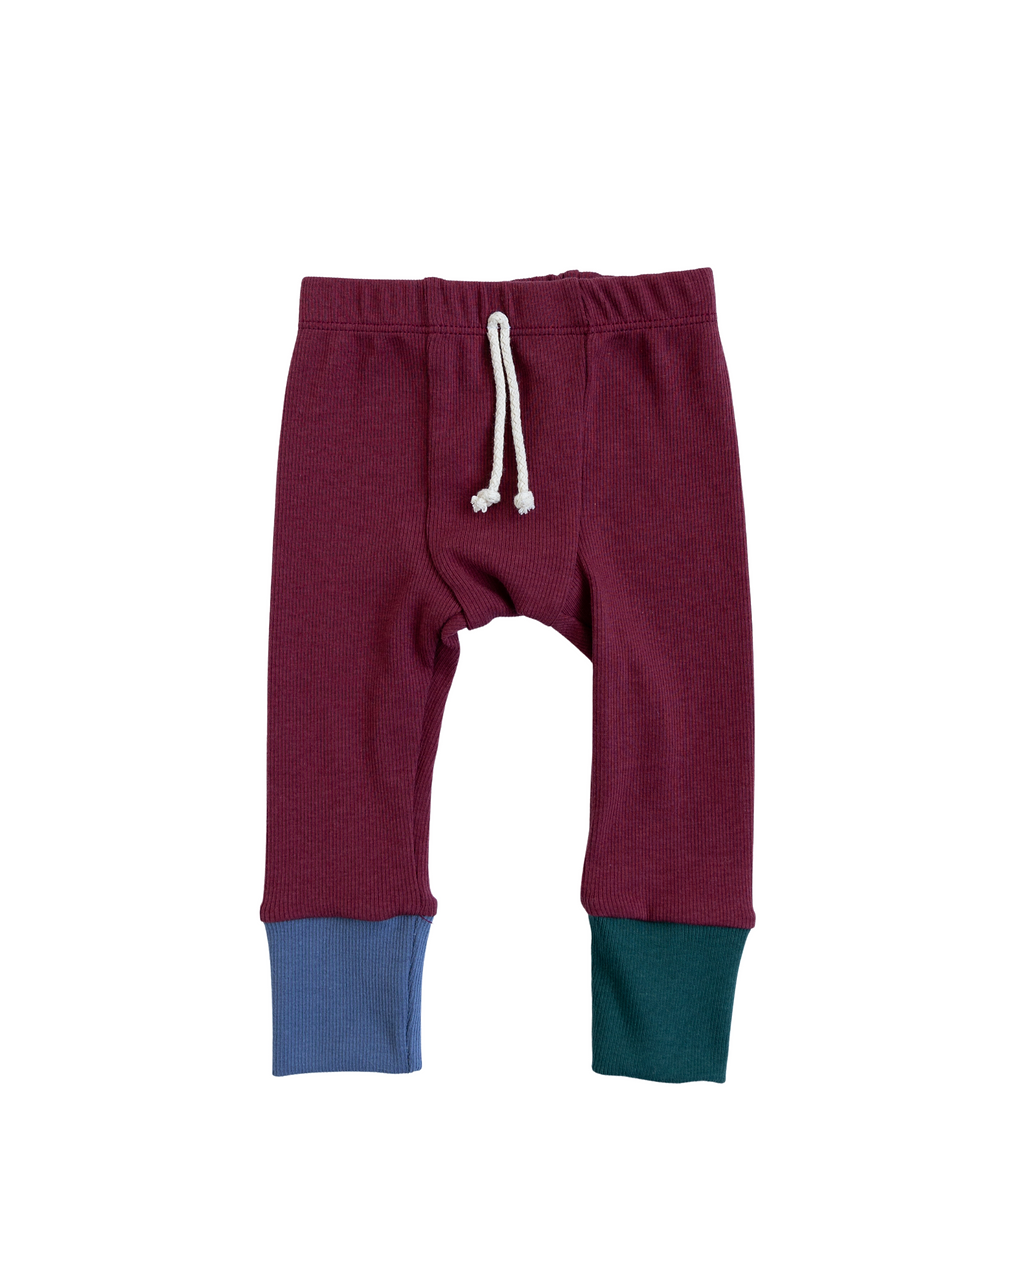 rib knit pant - ruby ink blue and spruce